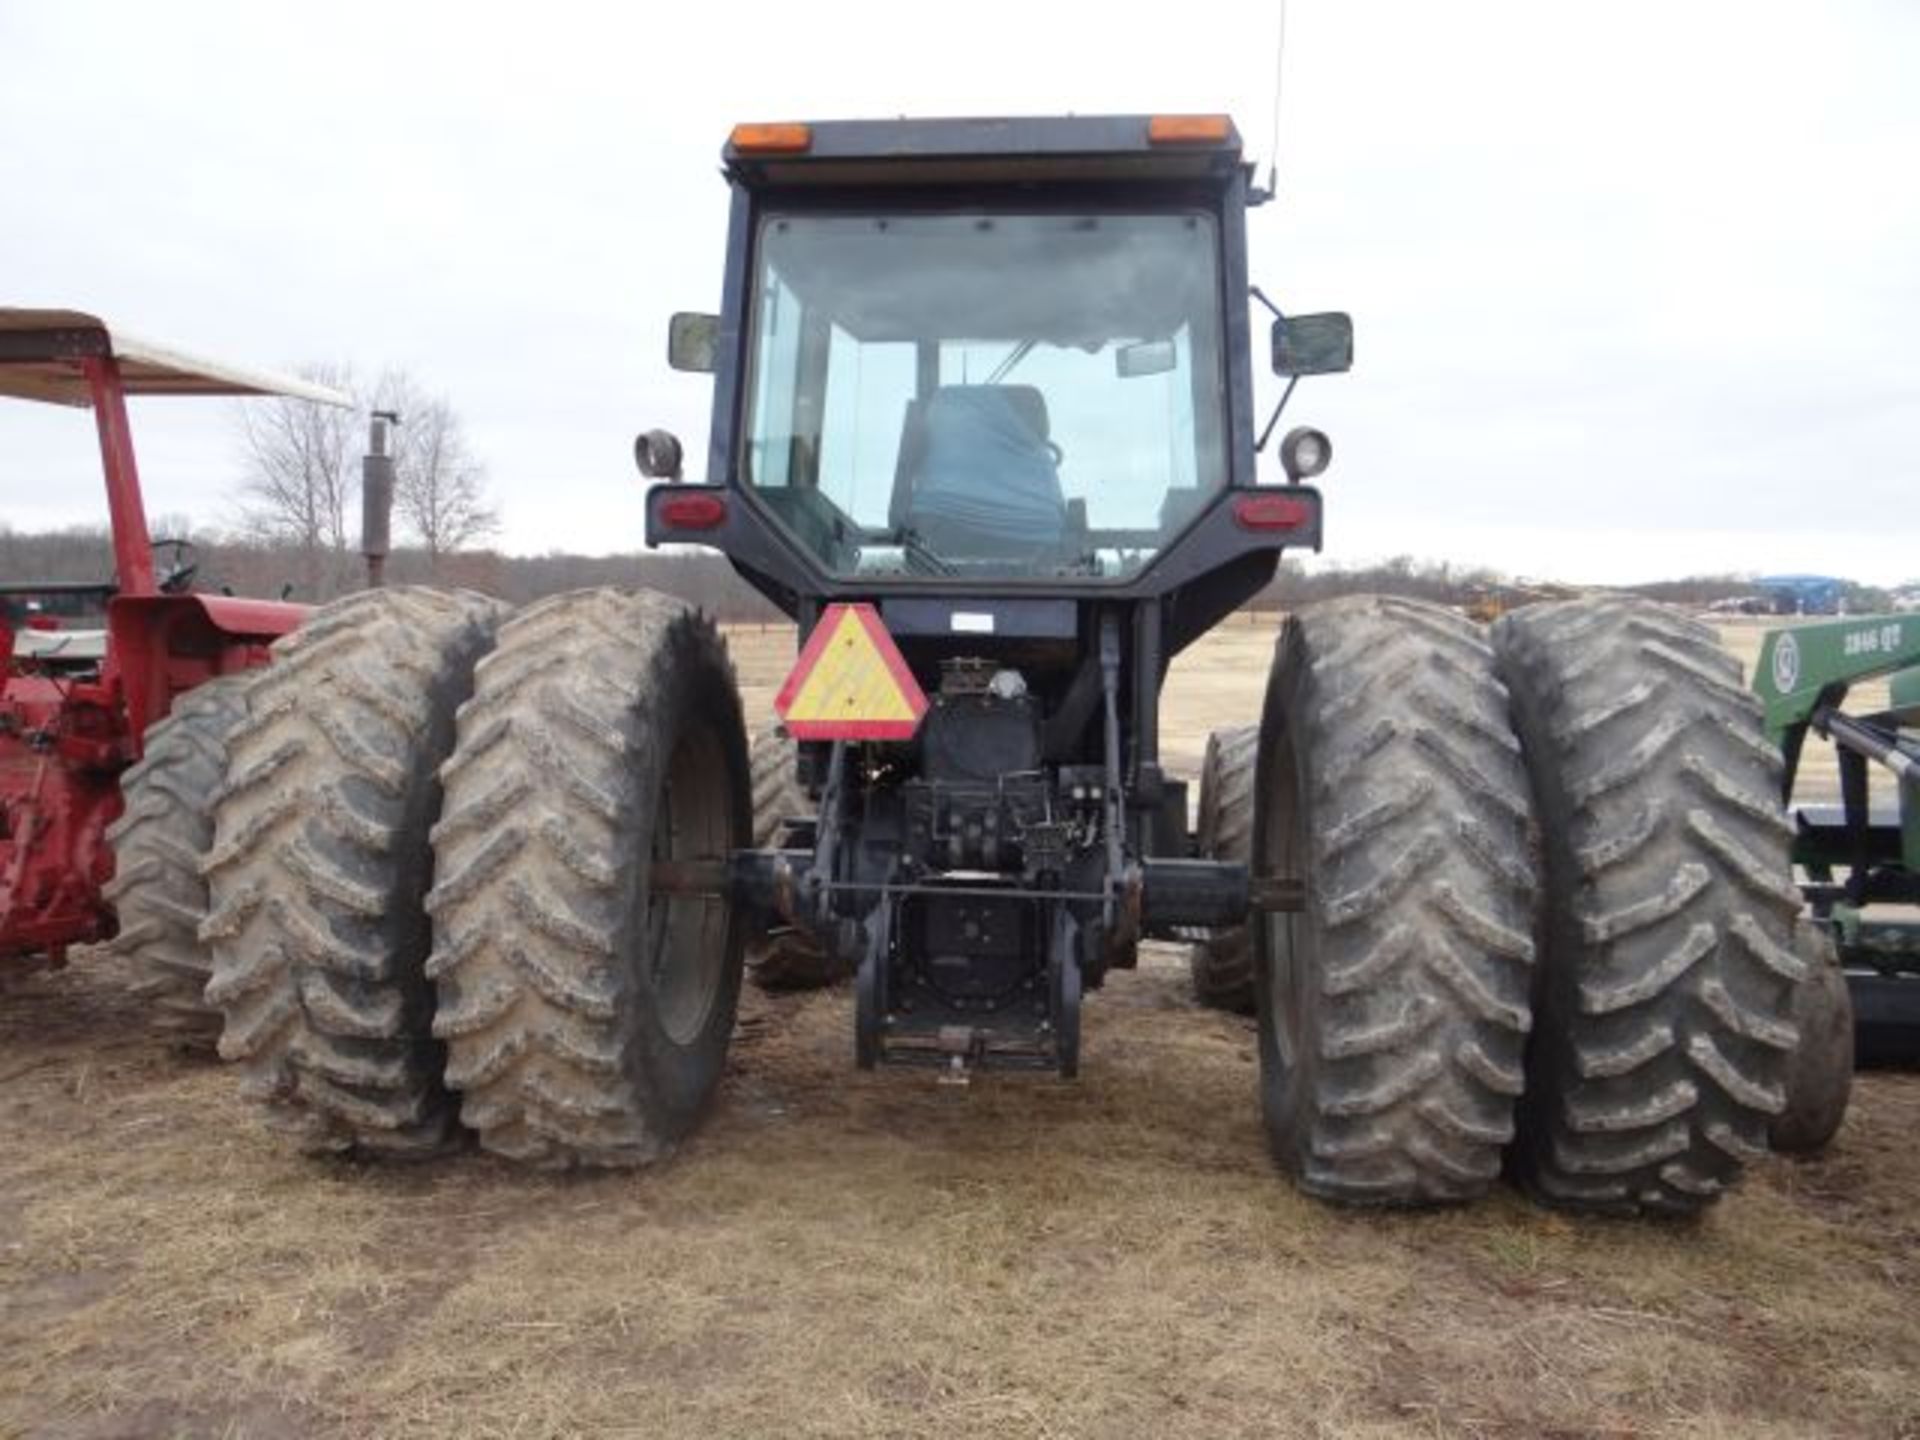 Duetz Allis 9170 Tractor 5460 hrs, New Rubber on Rear, Cold AC, Diesel, MFWD, Good Tractor - Image 4 of 6